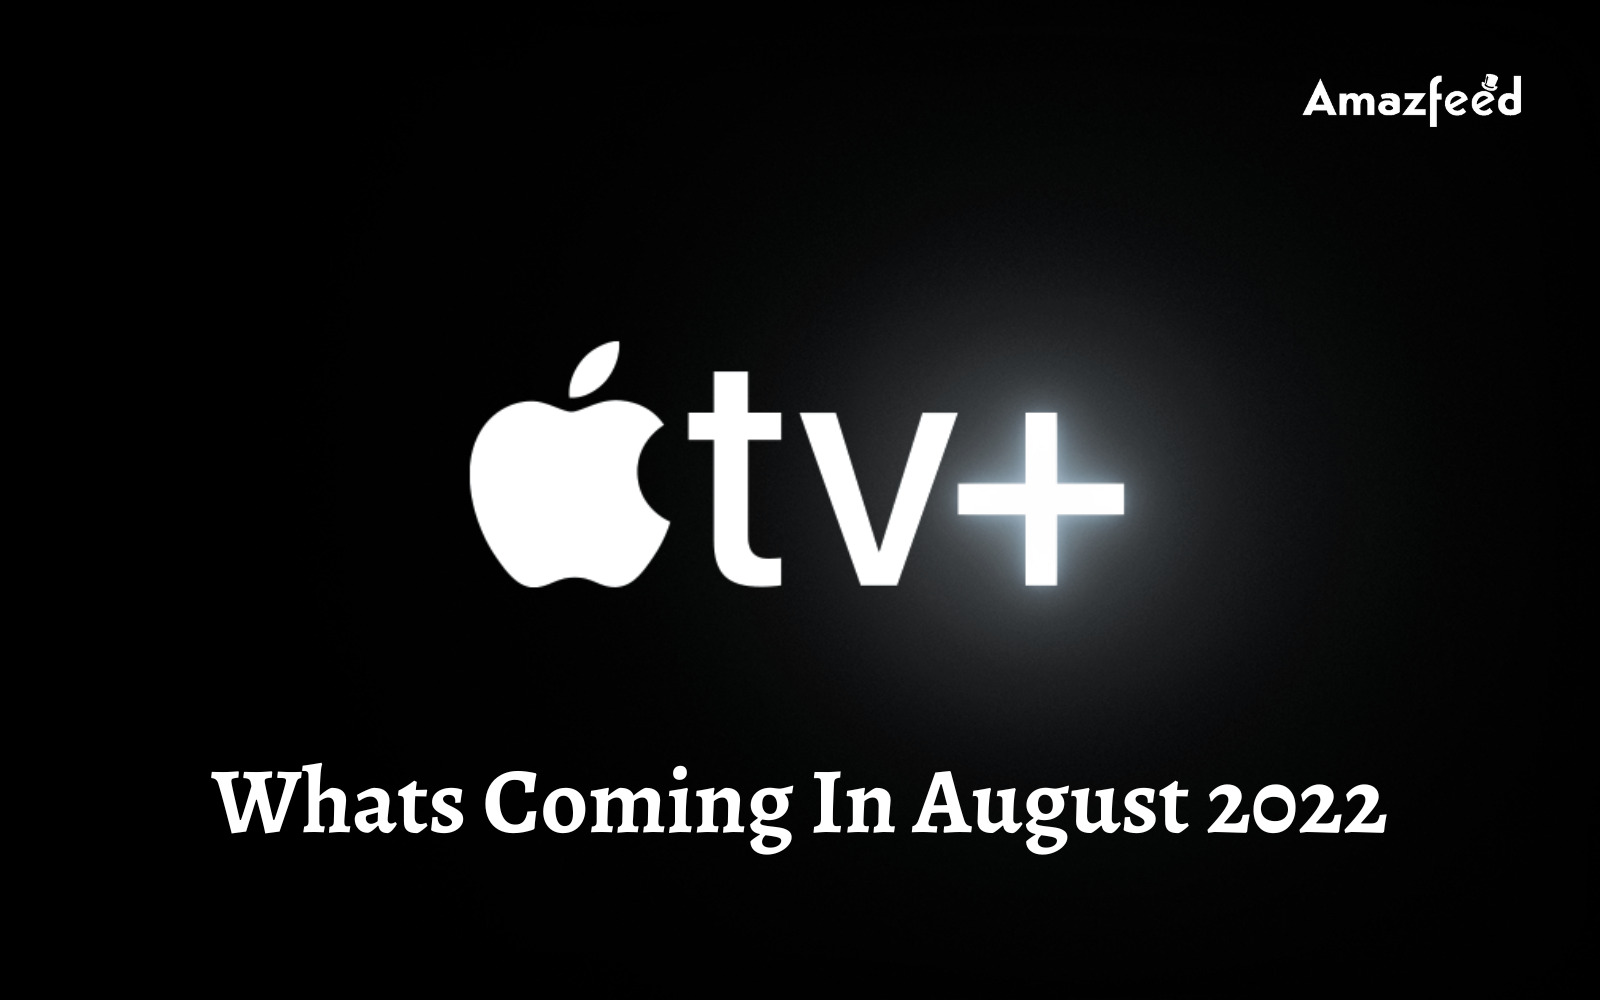 Whats Coming In August 2022 on apple tv